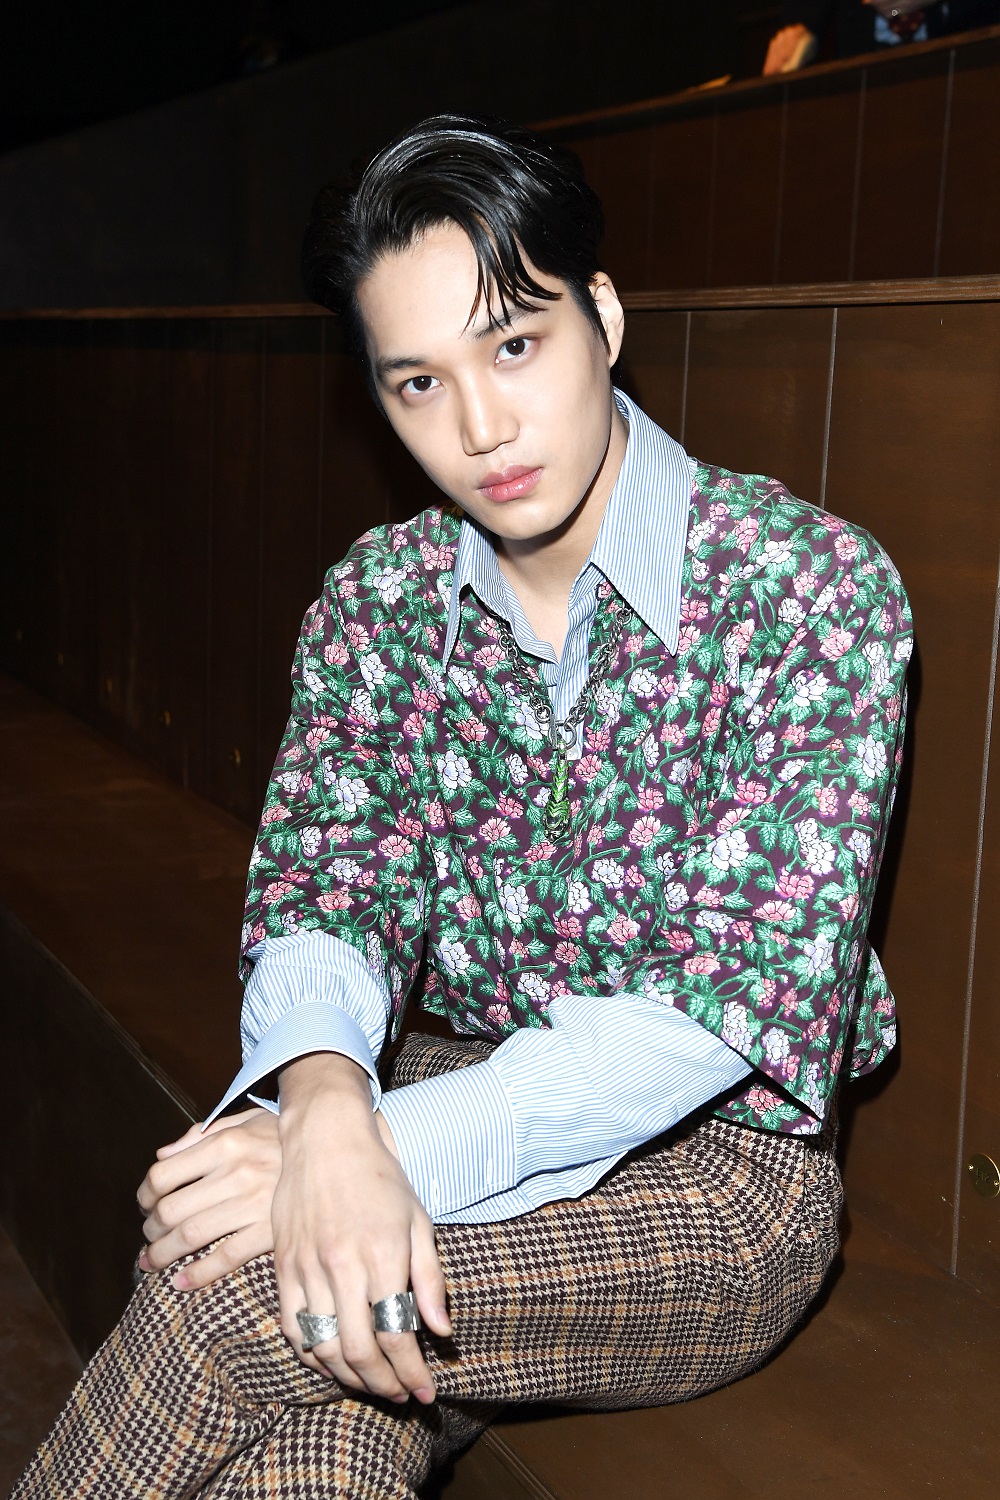 Group EXO Kai showed off colorful pattern styling.Kai attended the fashion brand Gucci (Gucci) 2020 Autumn Winter Mens Wear Collection held at Palazzo Delle Scintille in Milan, Italy on the 14th (local time).Kai layered a colorful floral patterned short-sleeved shirt and vintage striped shirt, matching brown beige colored vintage check pattern pants.Kai unbuttoned the shirt to produce a natural mood, and put the shirt into his pants so that his legs looked longer.Here, Kai added points with a necklace with a tiger head pandant made of green enamel, a thick silver ring with Z K initials, and a black leather booty.On the runway, Model showed a colorful and bold style that was quite different from Kai, who made use of dandy charm.Model locked all the buttons on his striped shirt and dressed in a colorful orange pattern tie to create a personality style.While Kai wore a floral pattern shirt inside his pants, Model pulled out an oversized shirt and matched the sneakers to save a casual mood.In addition, Model added classic points with glasses, matching big chain straps, a buckle bracelet layered over the shirt and a large red tote bag, unlike Kai, which used a variety of silver accessories.Alessandro Michele has unleashed a variety of mens wear under the theme Party as Five Years Old (Rave Like You Are Five).The fashion show was attended by EXO Kai, actors and Lee Su-hyun Jared Leto, Lee Su-hyun, DJ and producer Mark Ronson, as well as other celebrities from around the world.EXO Kai, runway model, and other clothes. Whats the difference?